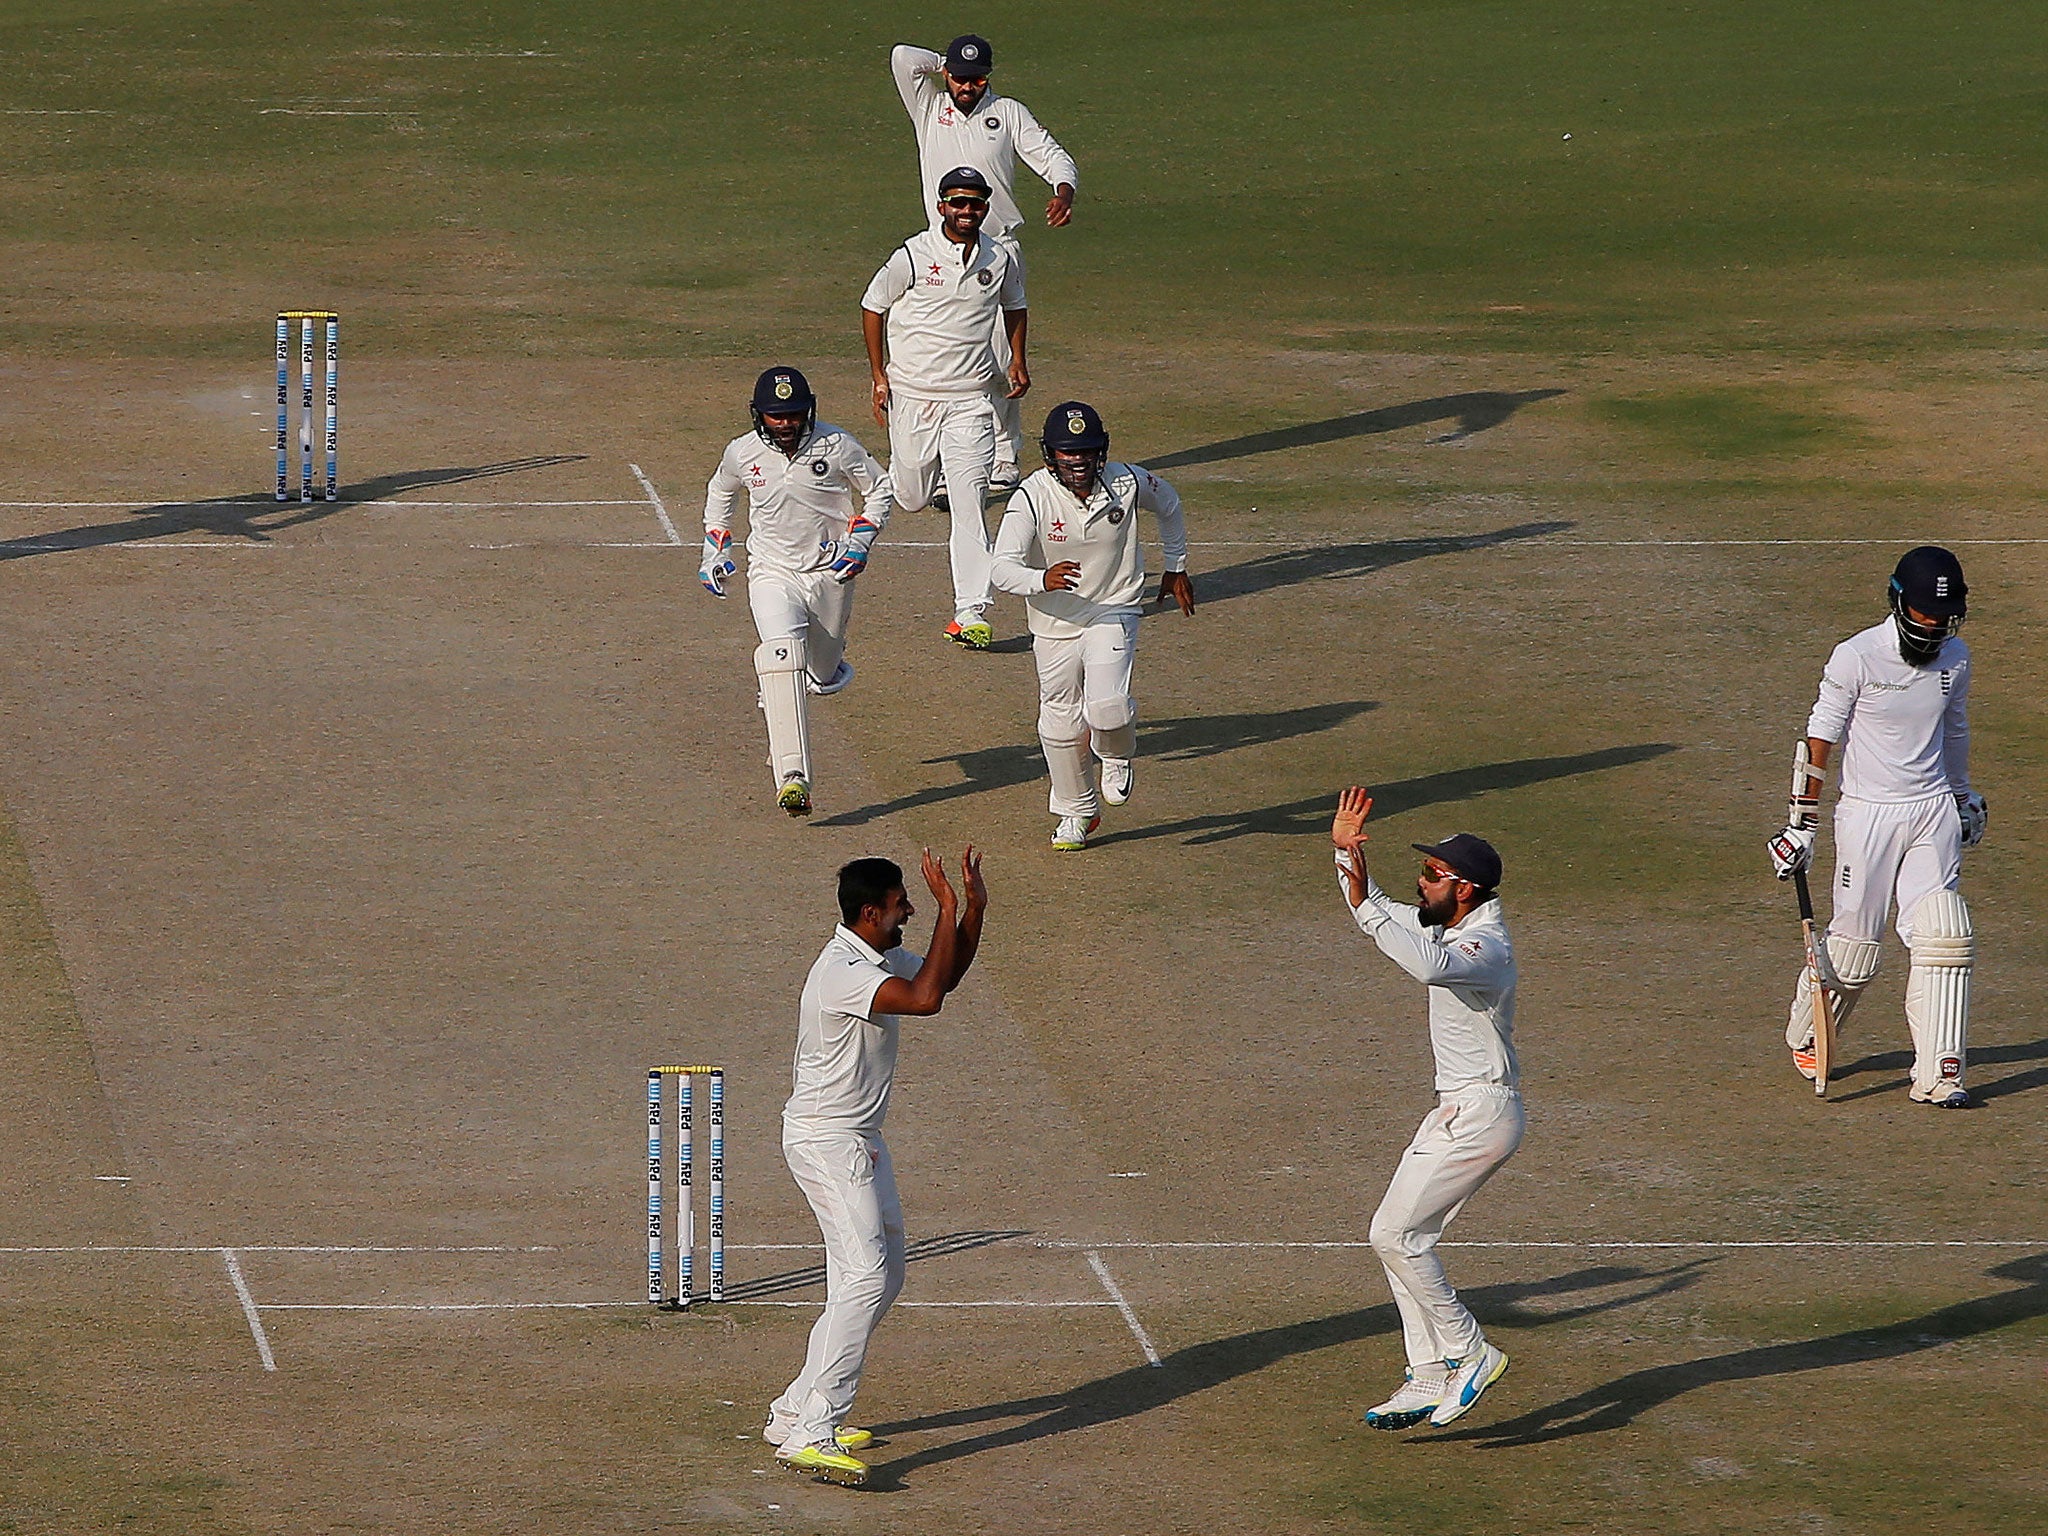 Moeen Ali takes his leave after being bowled by Ravichandran Ashwin